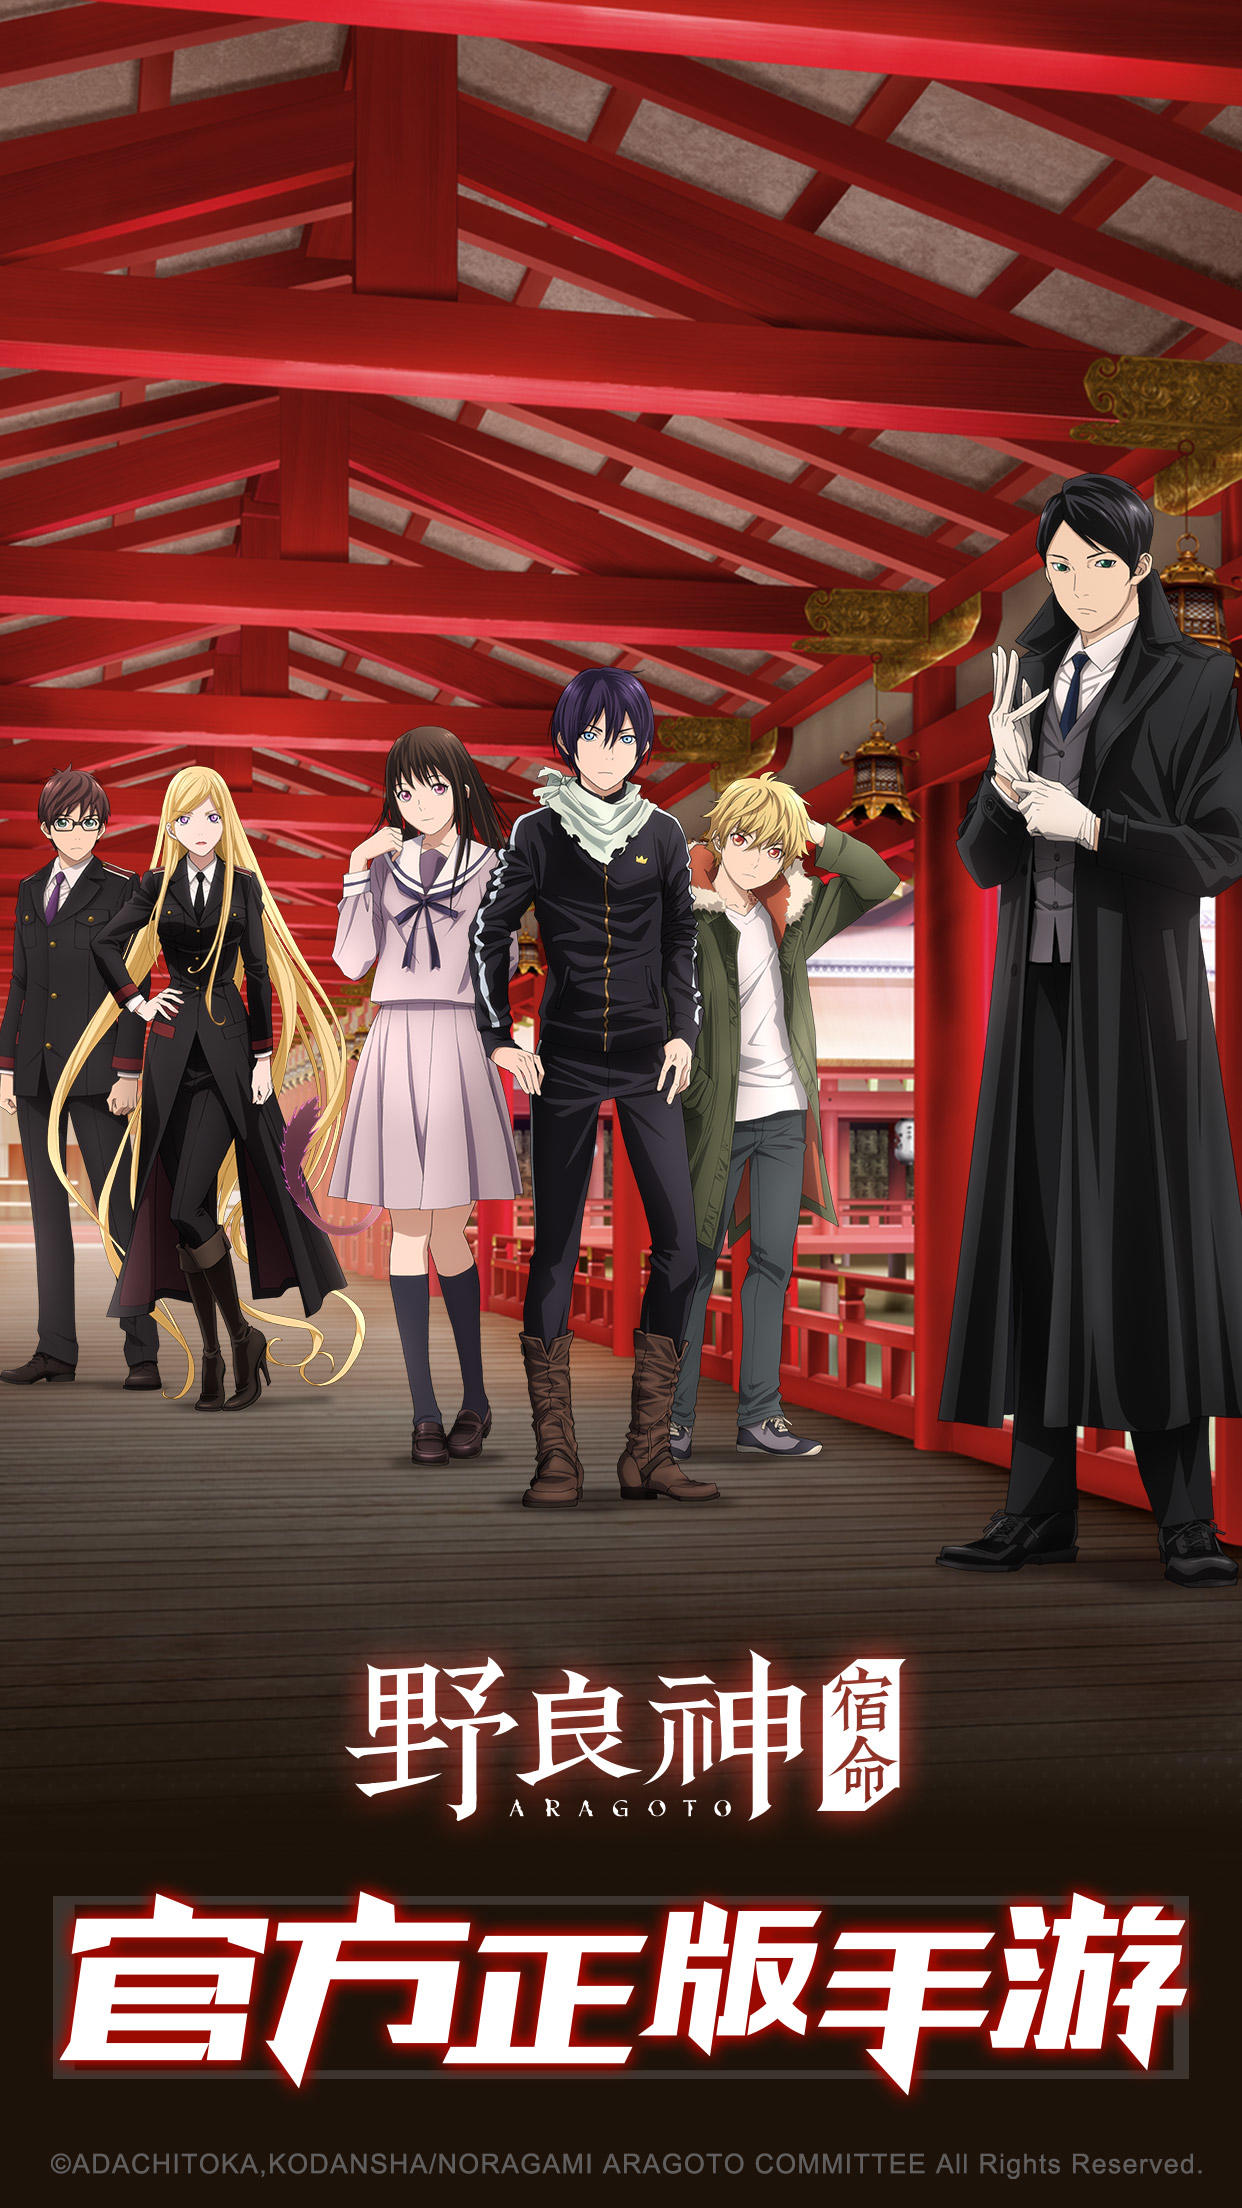 All characters and voice actors in Noragami Aragoto 